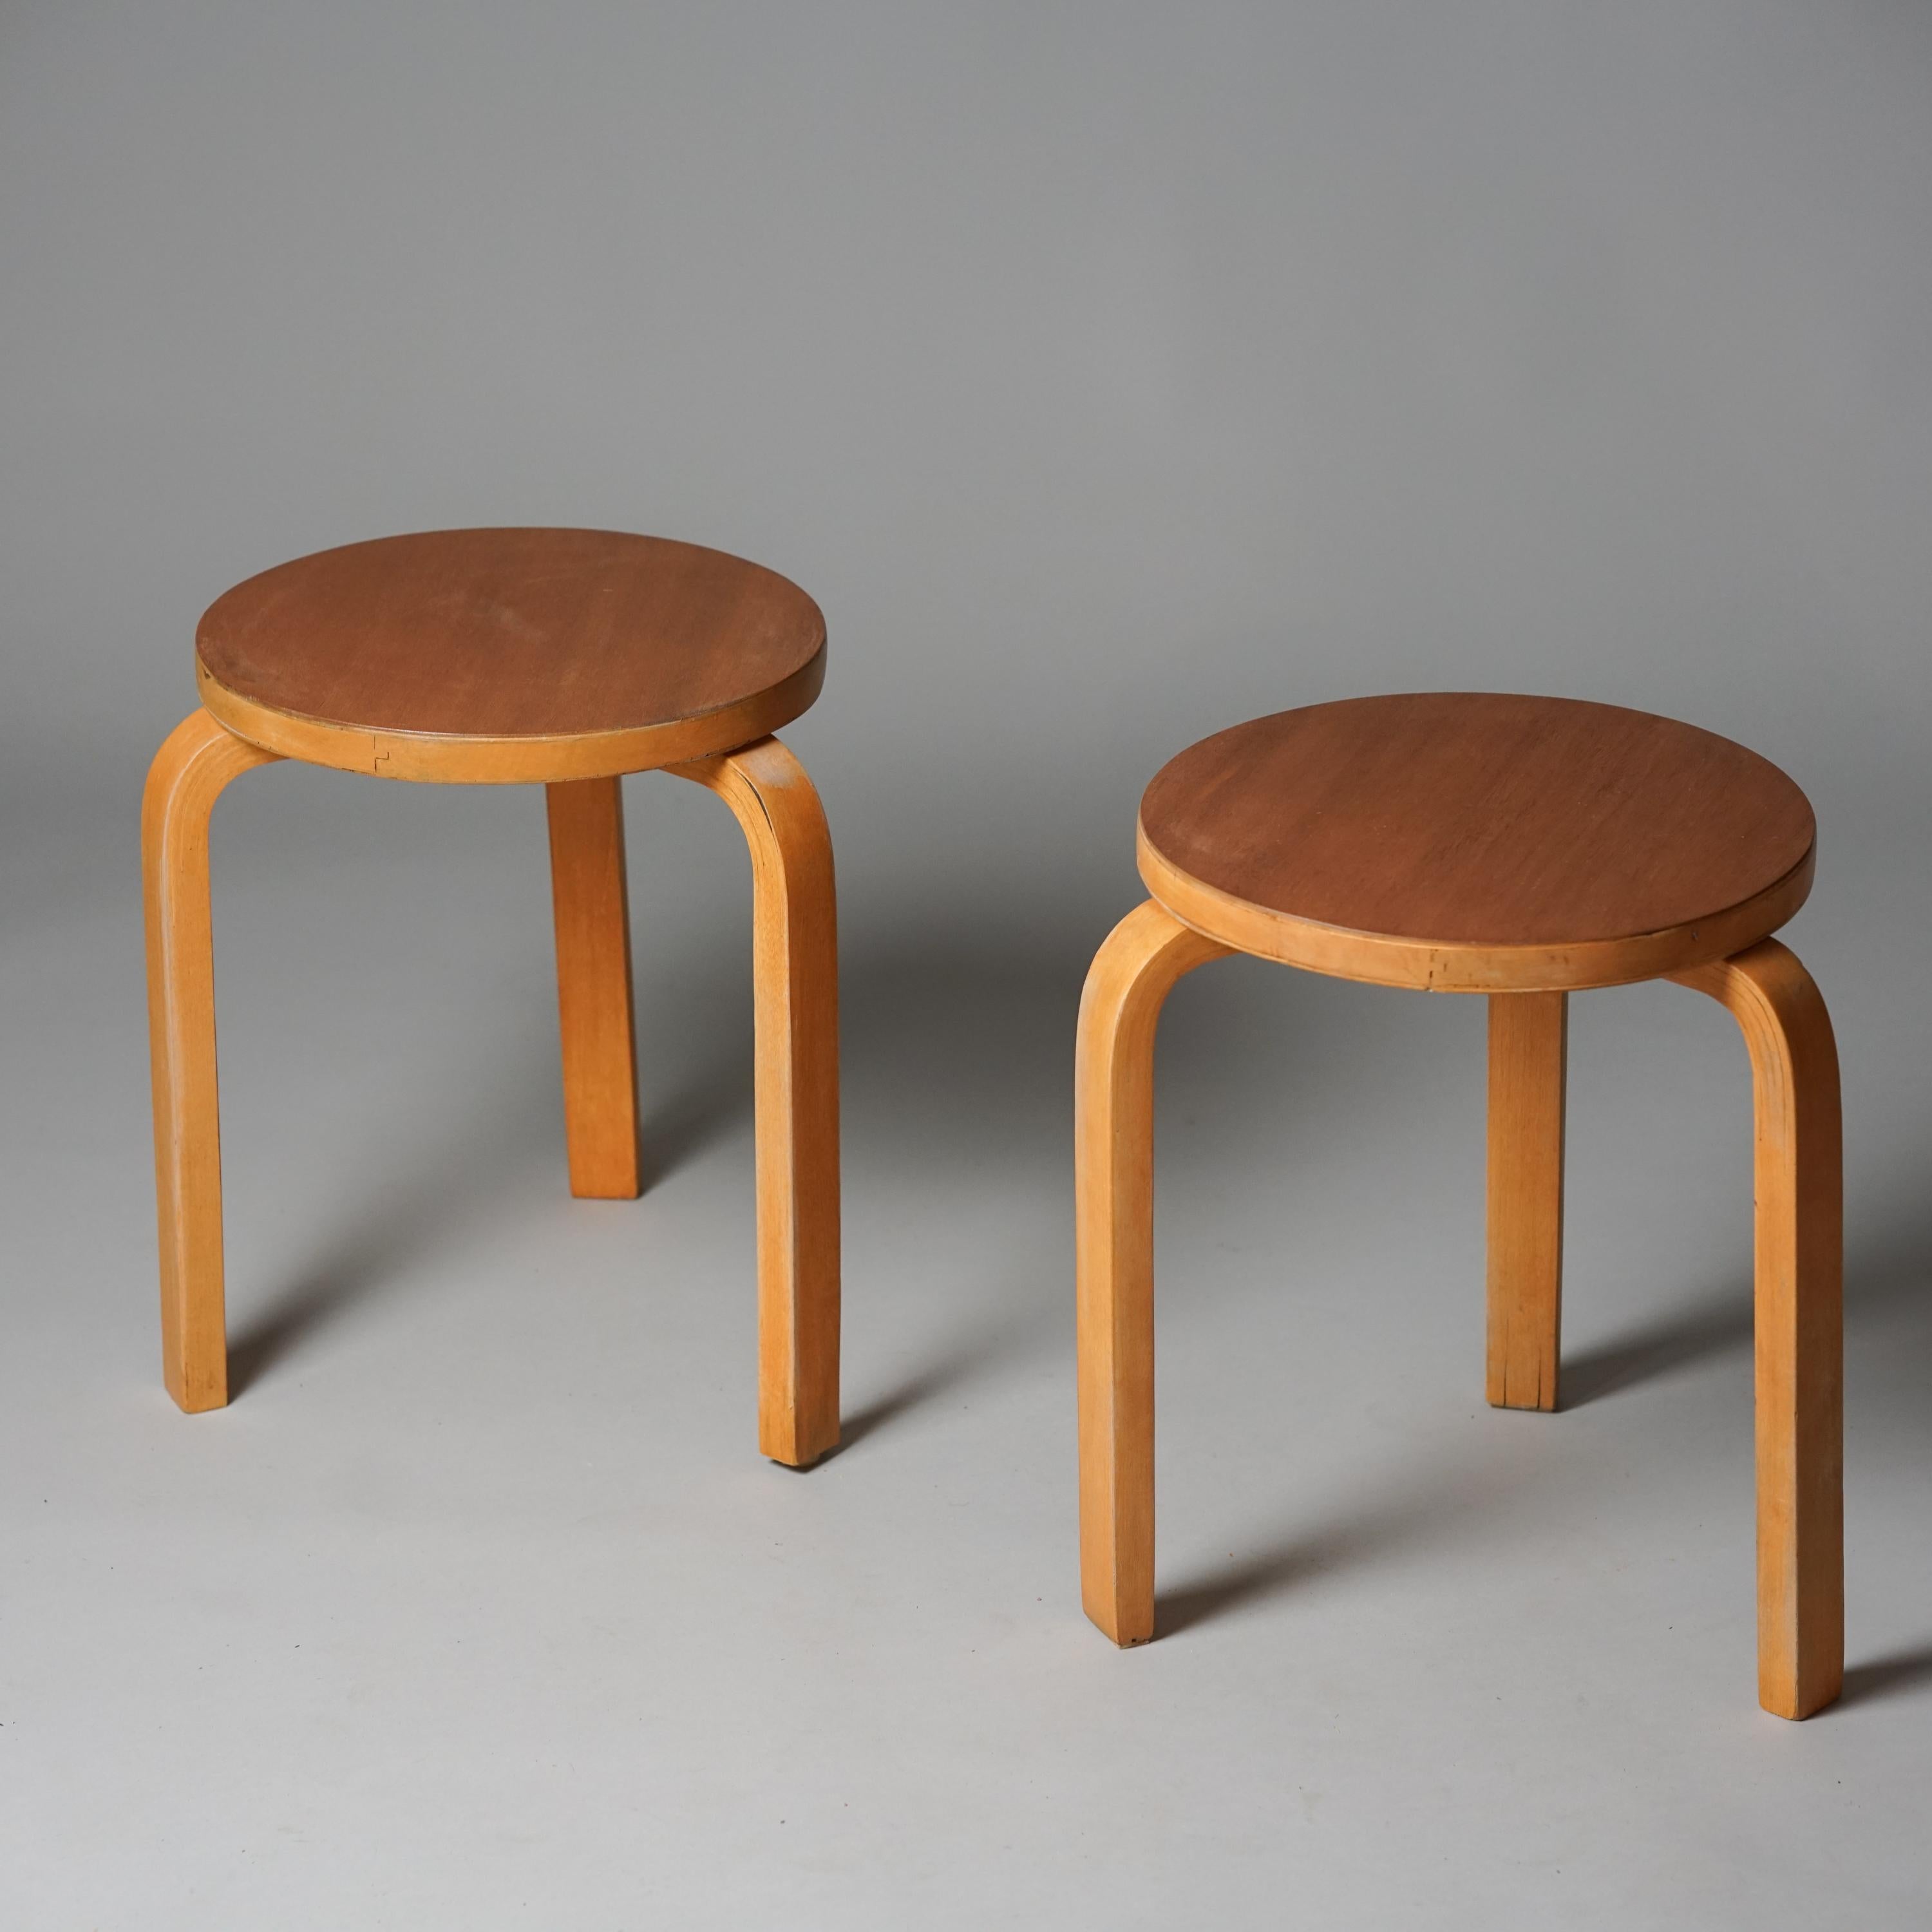 Pair of rare model 60 stools, designed by Alvar Aalto, manufactured by Oy Huonekalu- ja Rakennustyötehdas Ab, 1940s. Birch frame with teak top. Good vintage condition, patina consistent with age and use. The stools are sold as a set. 

Alvar Aalto